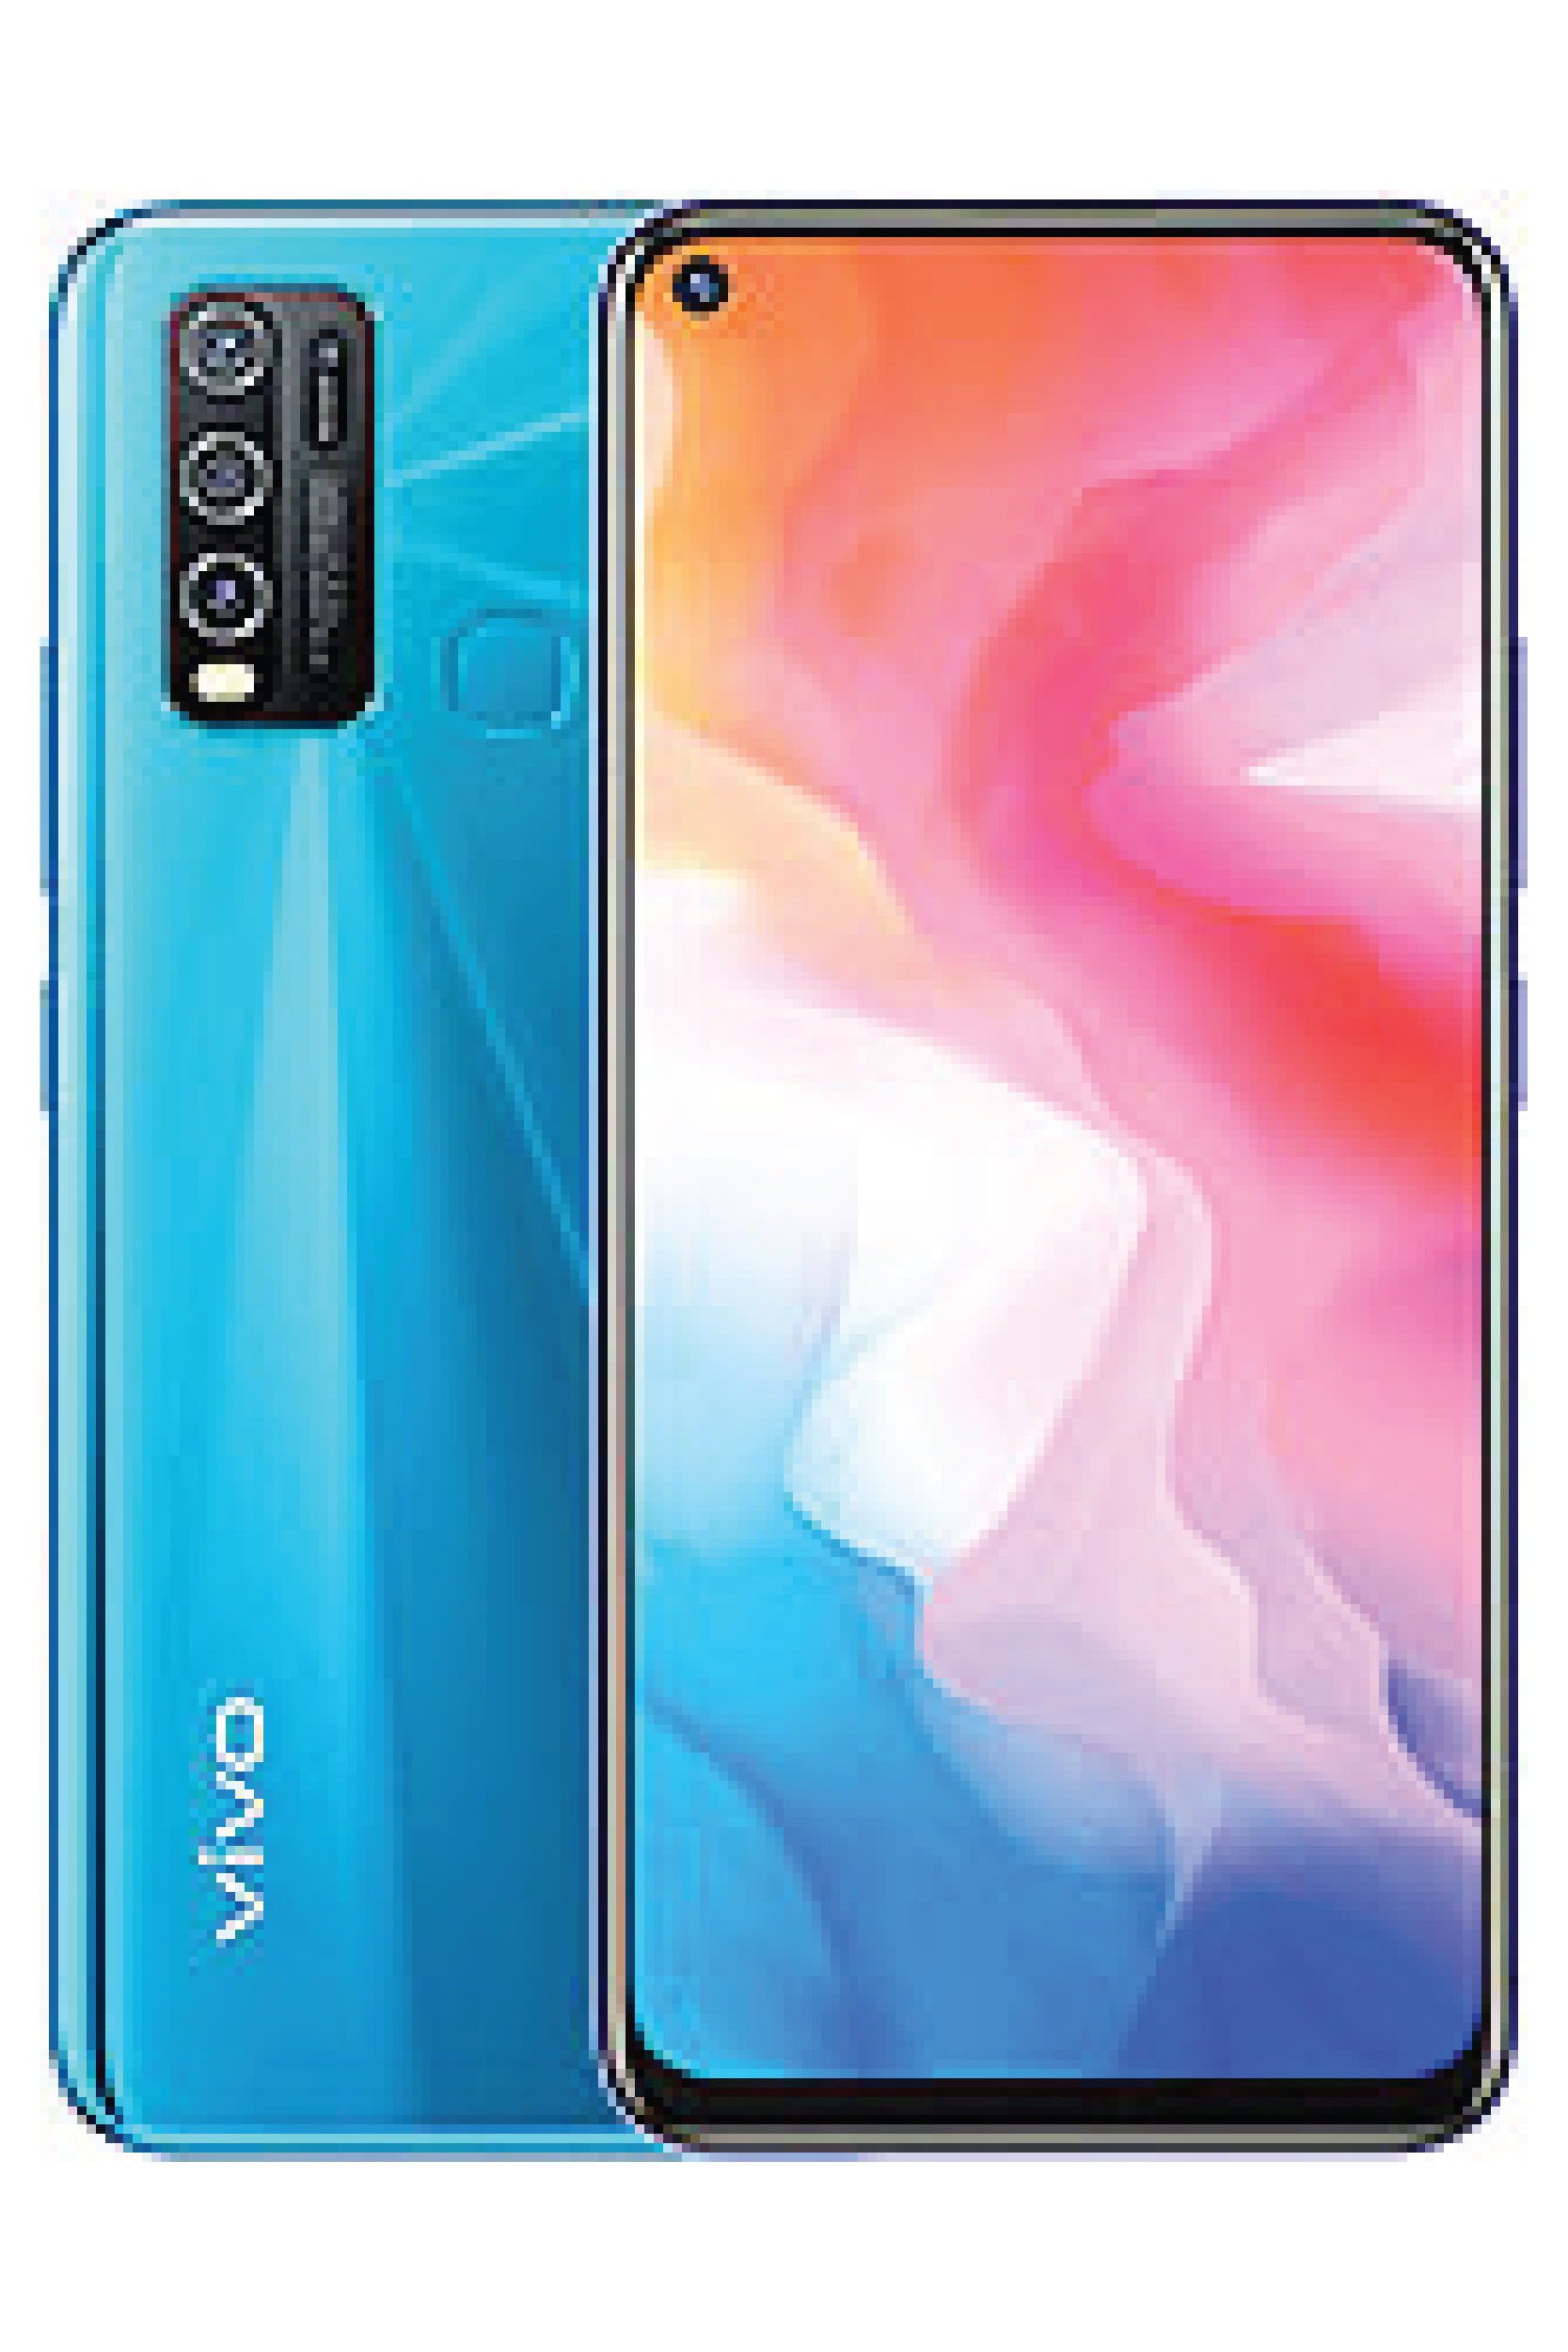 vivo Y30 Price in Pakistan & Specs: Daily Updated